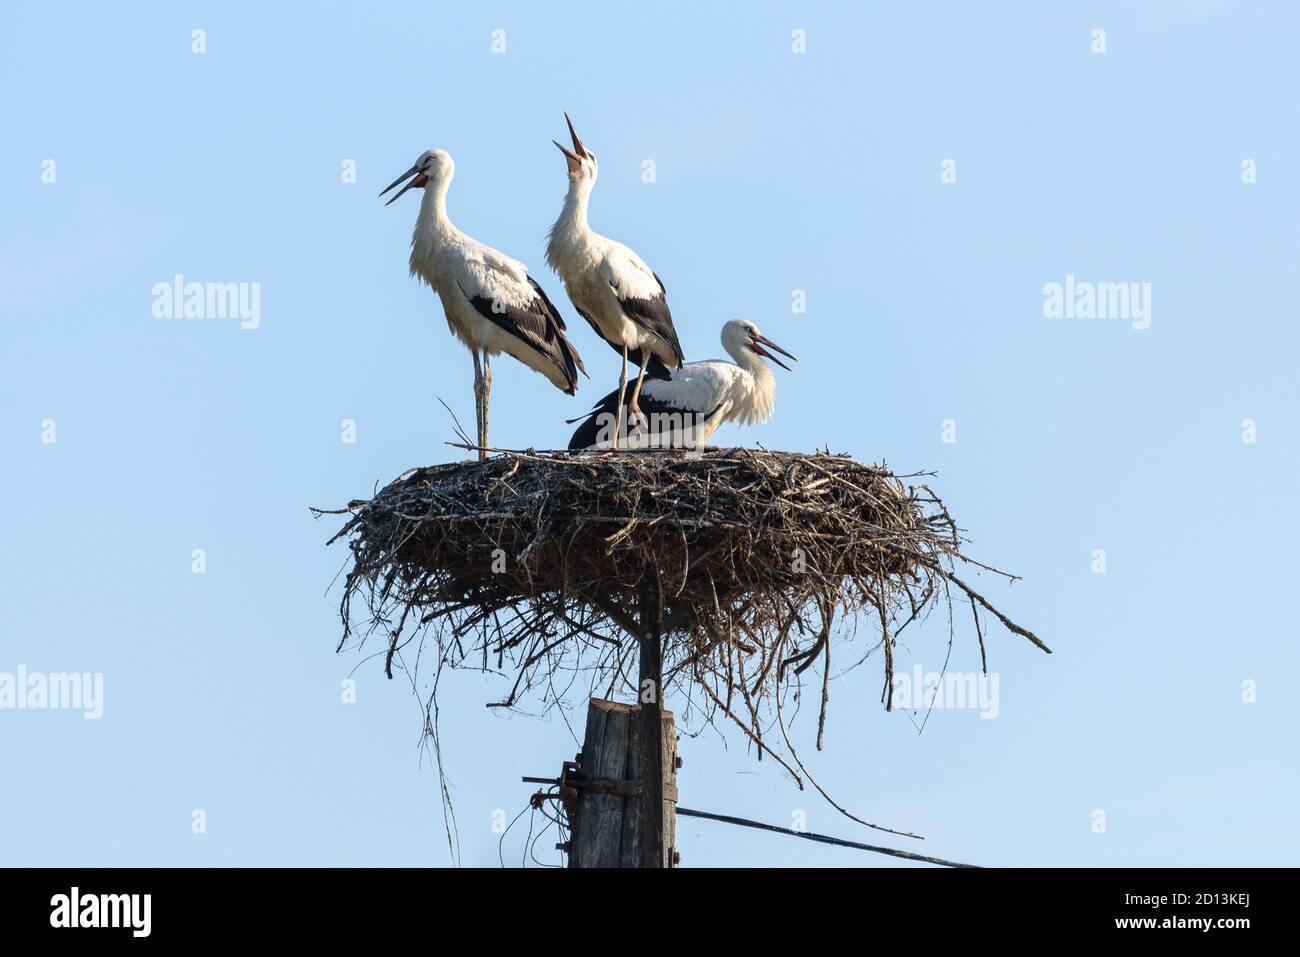 Three juvenile white storks in their nest atop a pole in Hortobagy National Park, Hungary Stock Photo